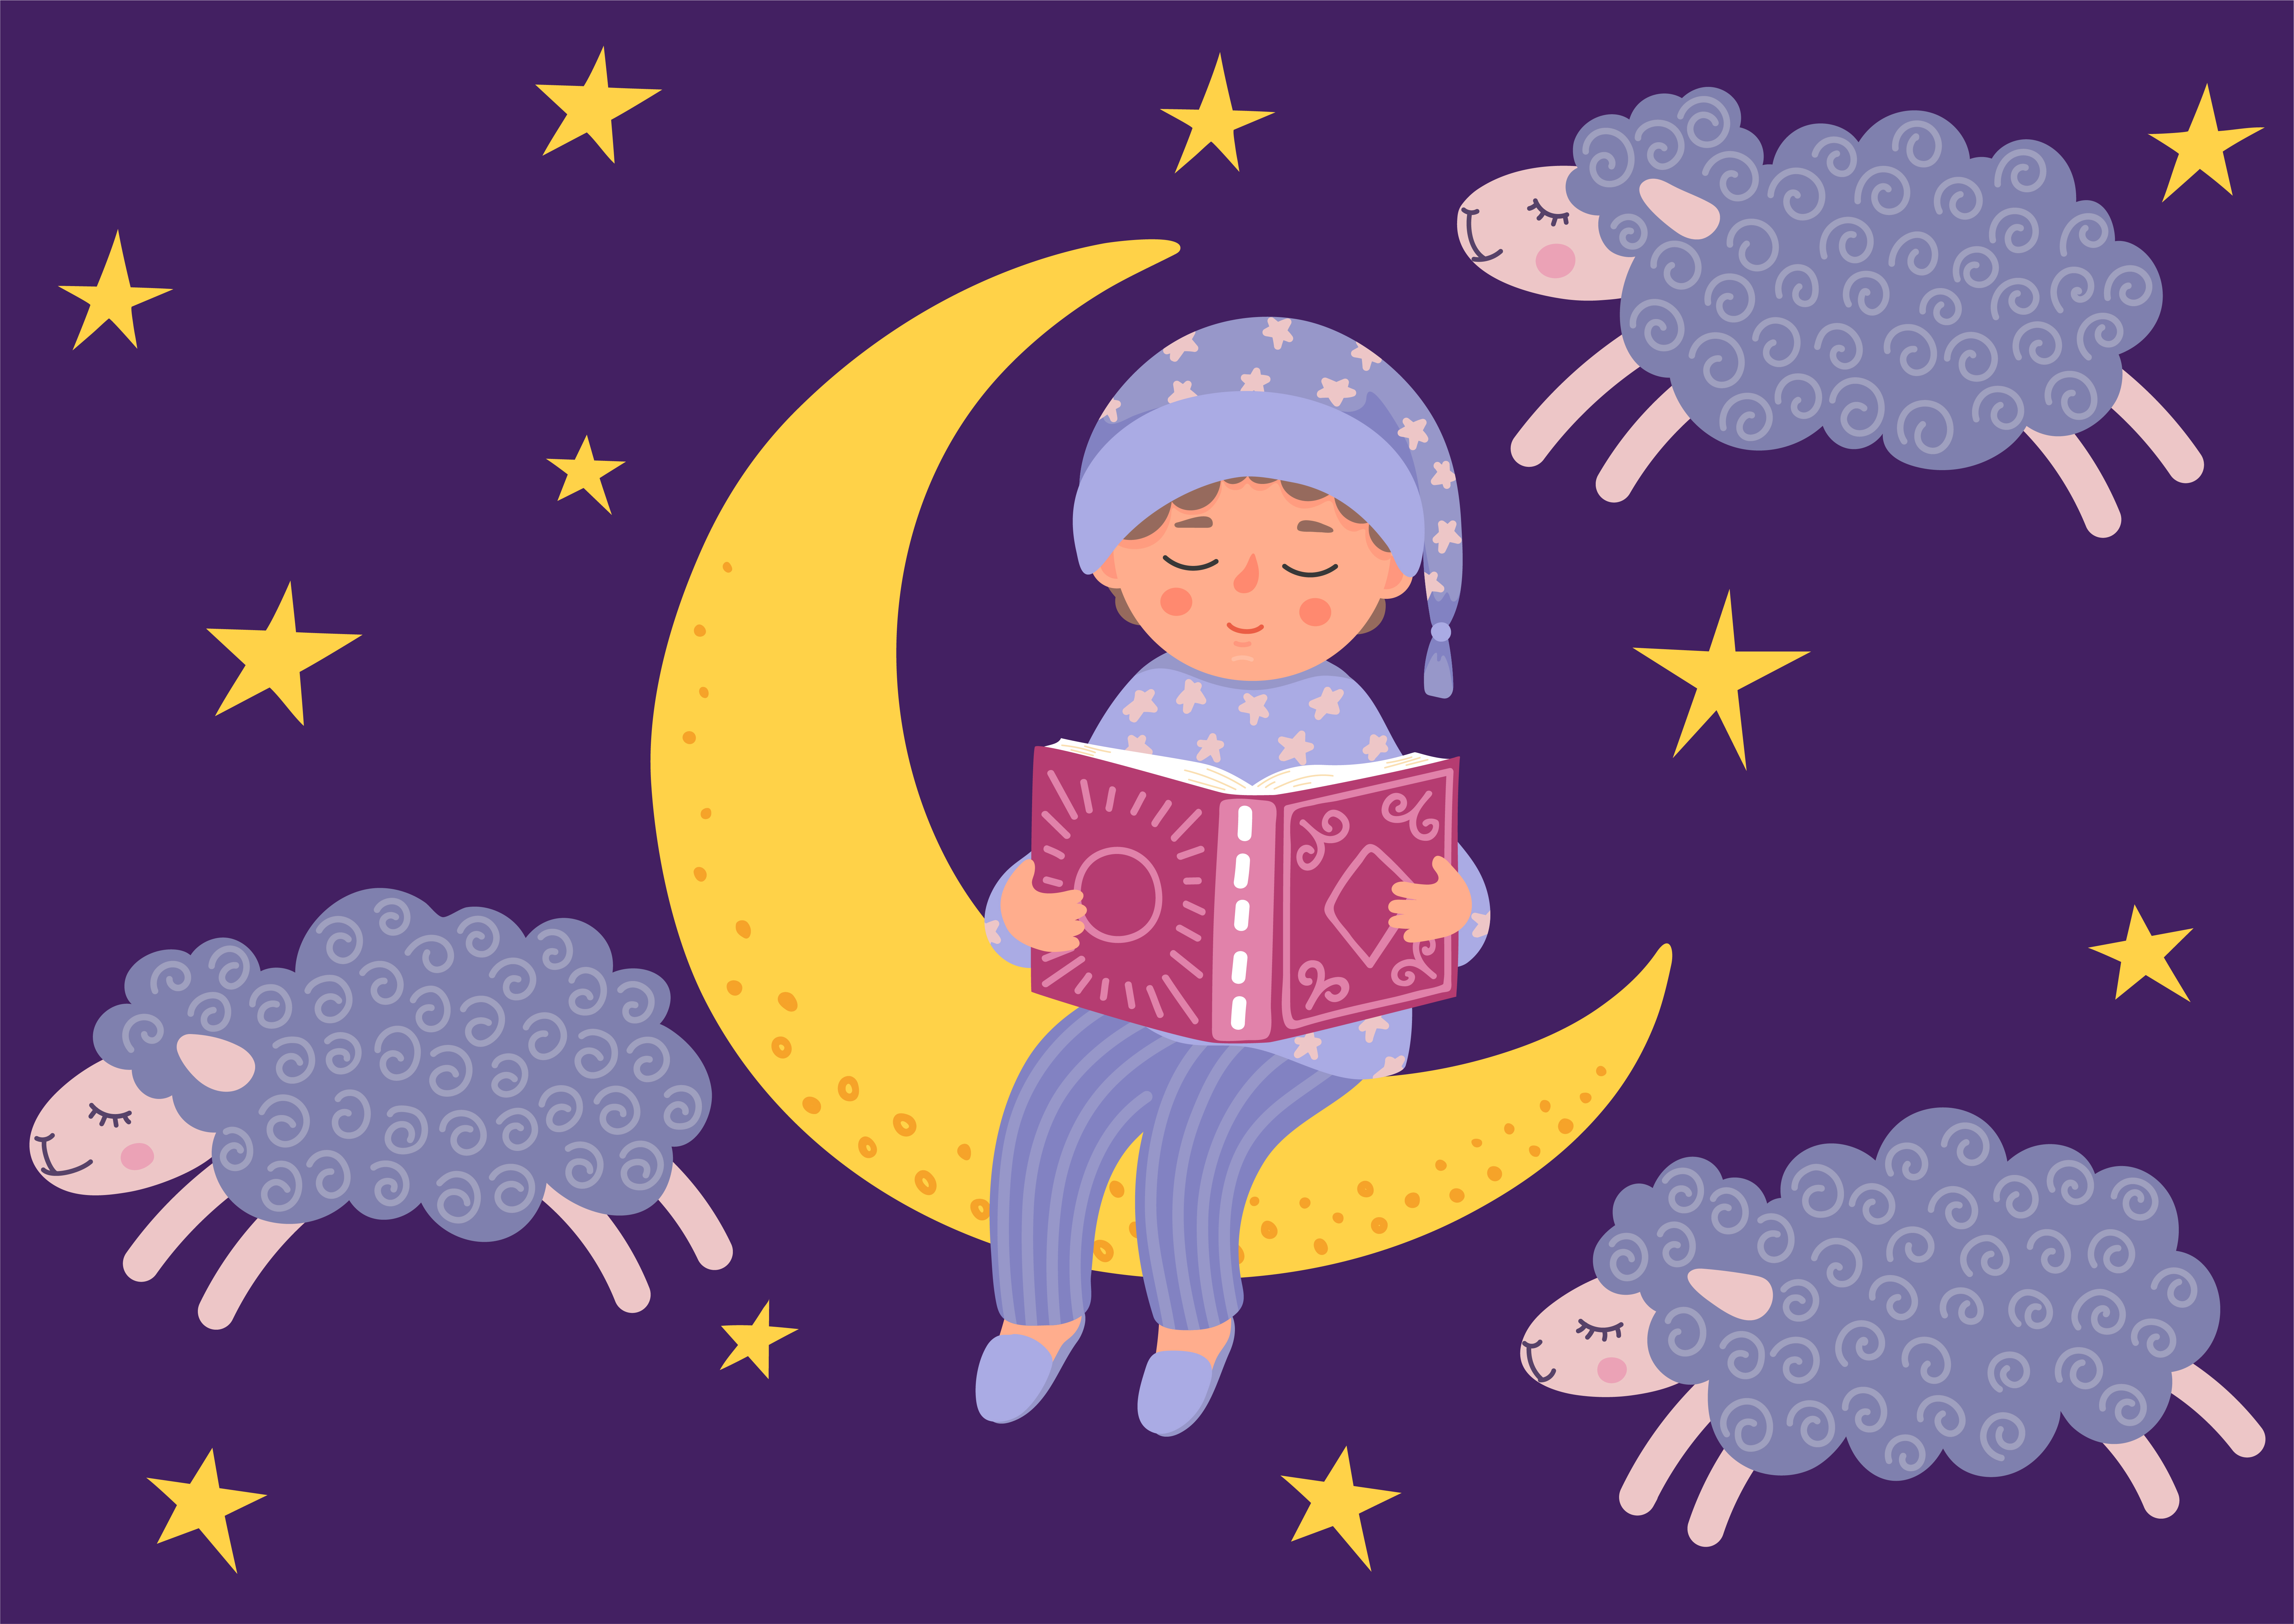 cartoon of boy in pajamas sitting on moon holding book surrounded by sheep